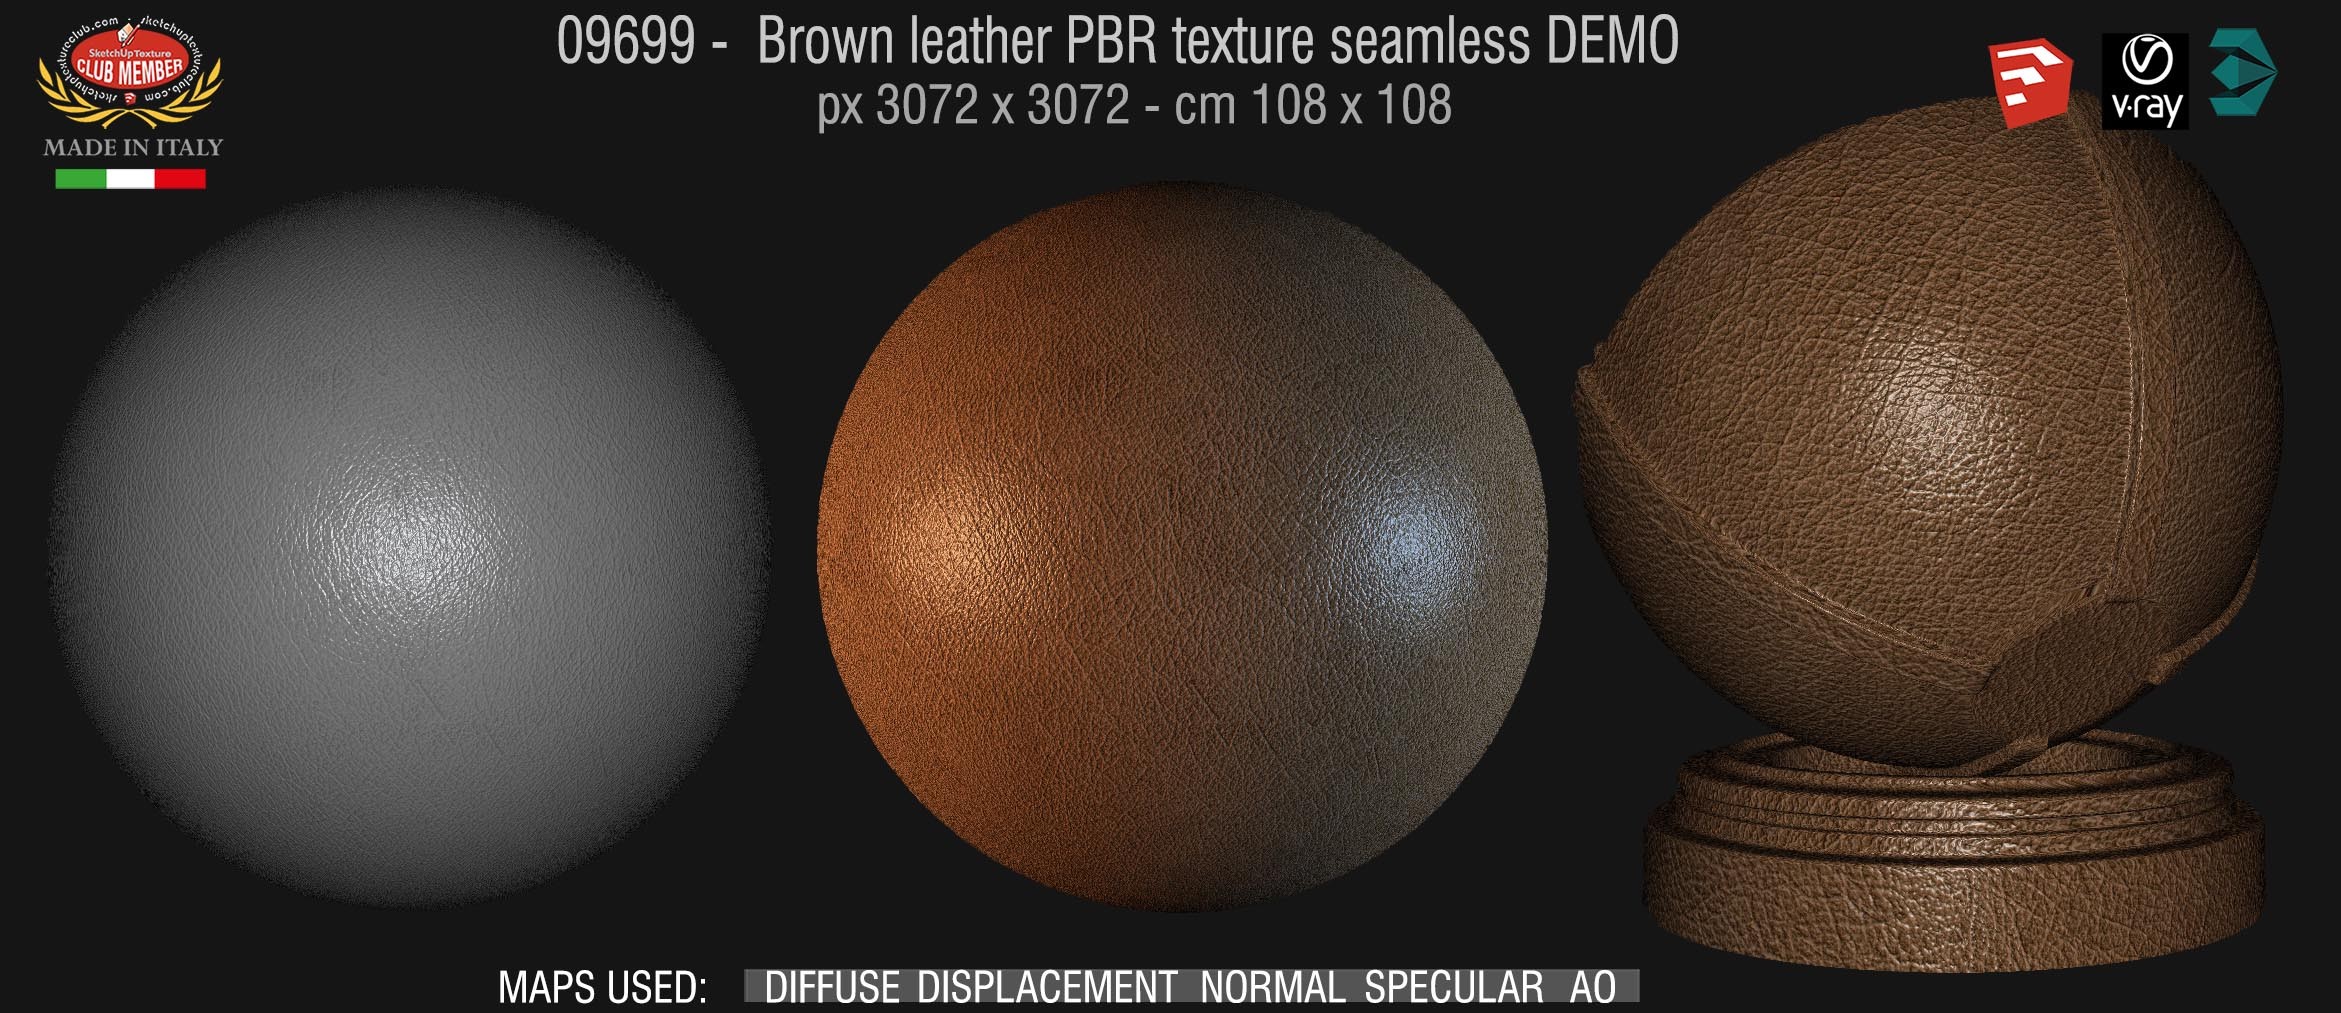 09699 Brown leather PBR texture seamless DEMO